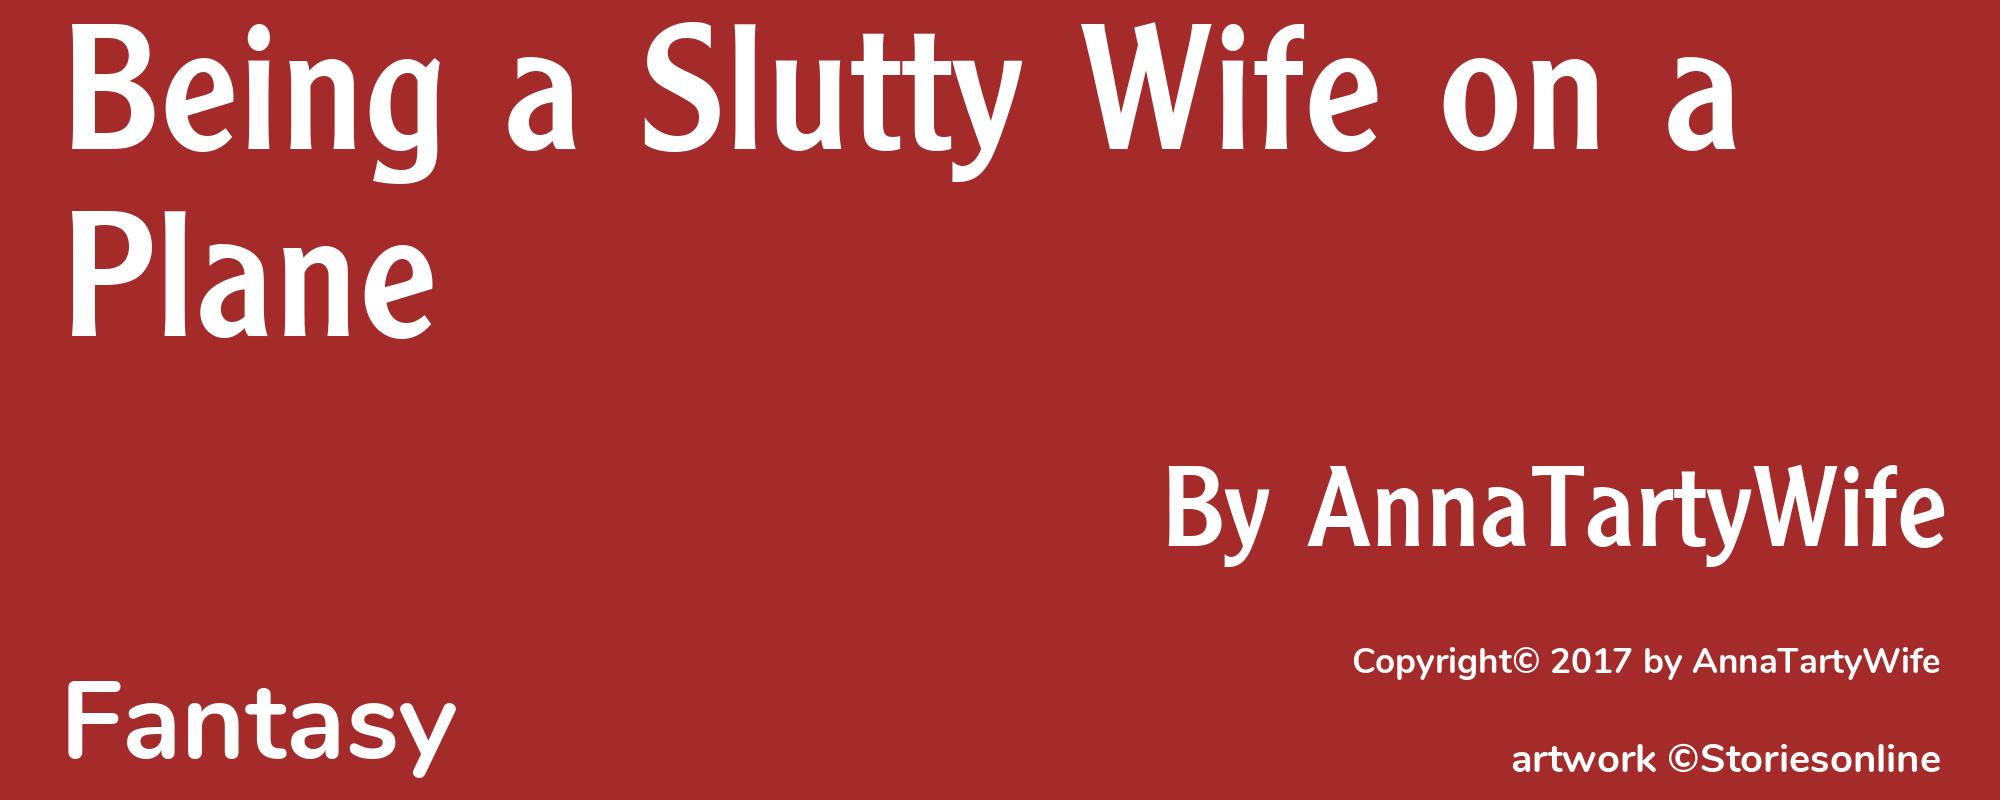 Being a Slutty Wife on a Plane - Cover